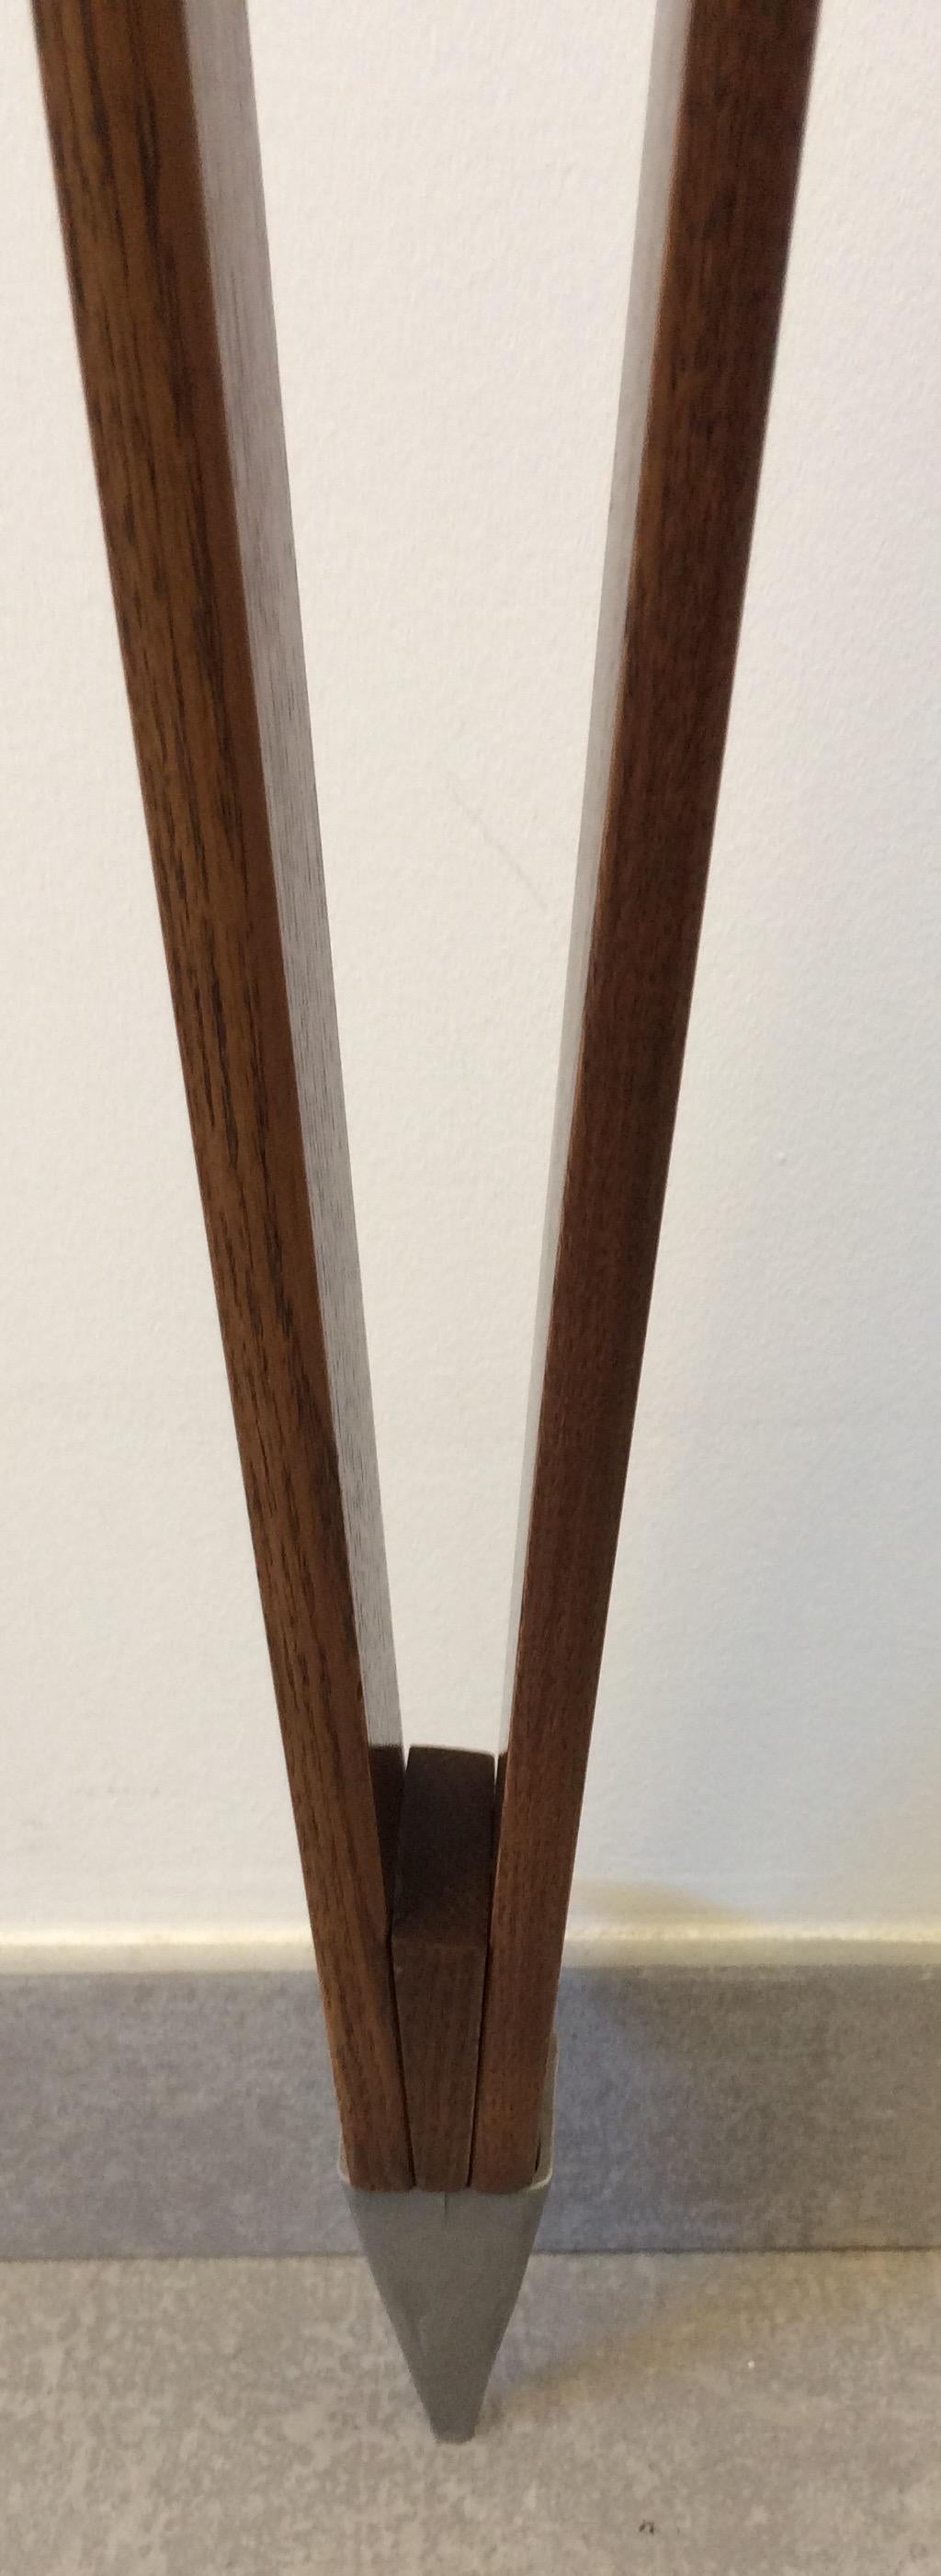 French Wooden Tripod Floor Lamp by H. Morin, Paris